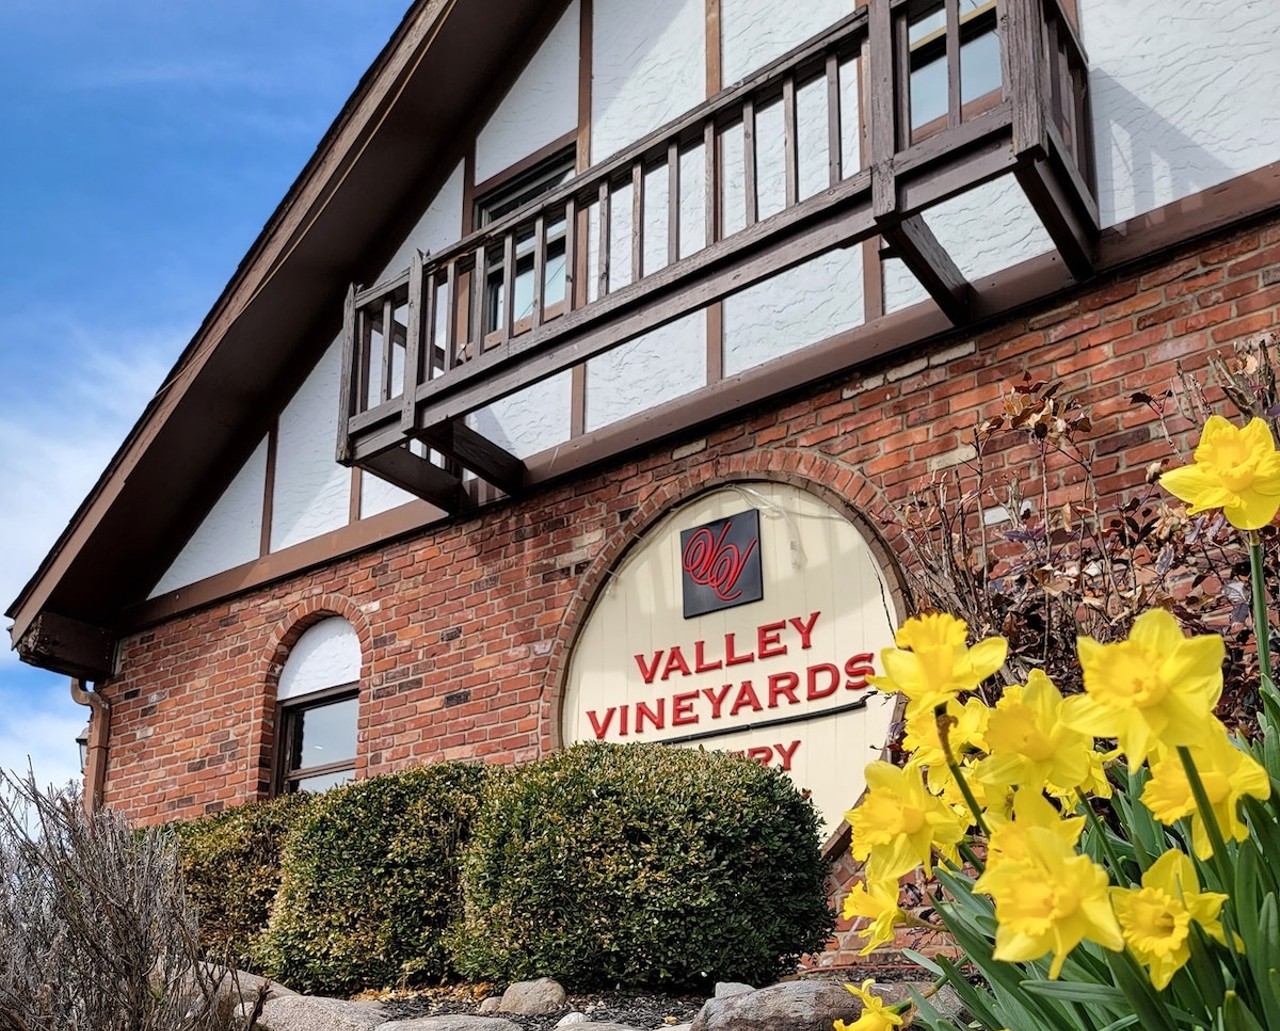 Best Local Winery No. 4: Valley Vineyards
2276 US-22 & OH-3, Morrow